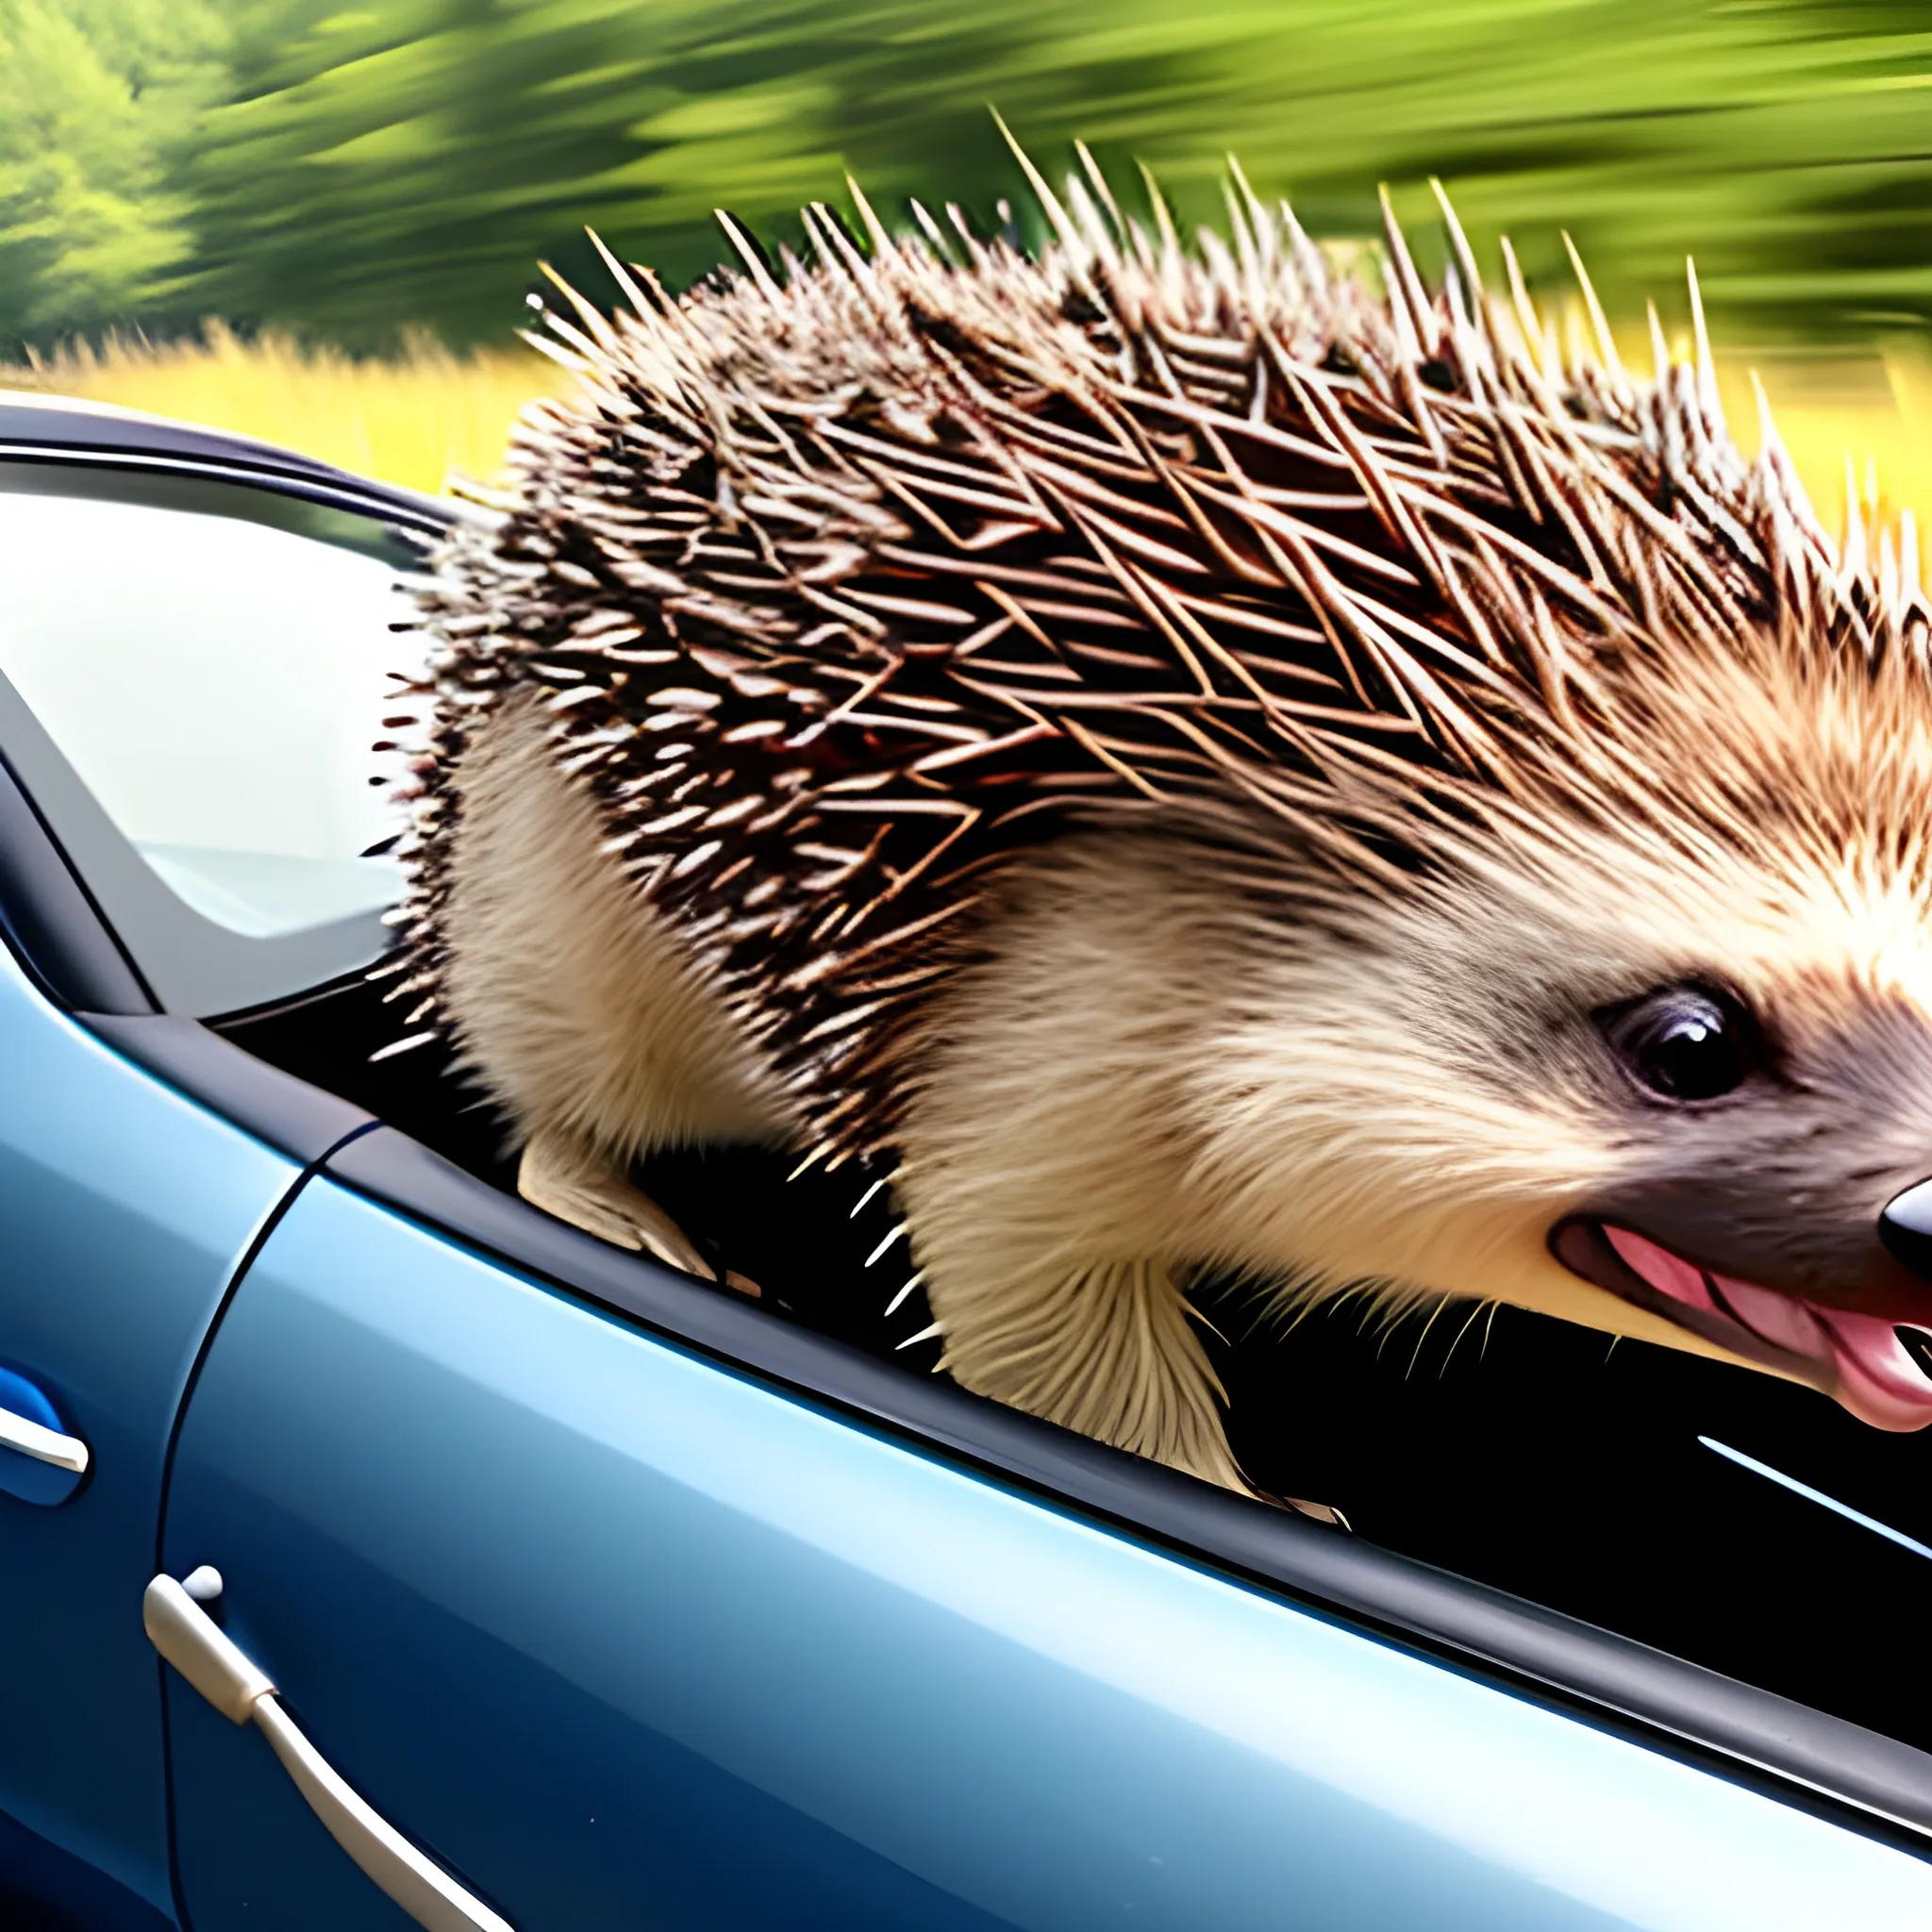 A happy porcupine driving a car to New Hampshire on a nice day